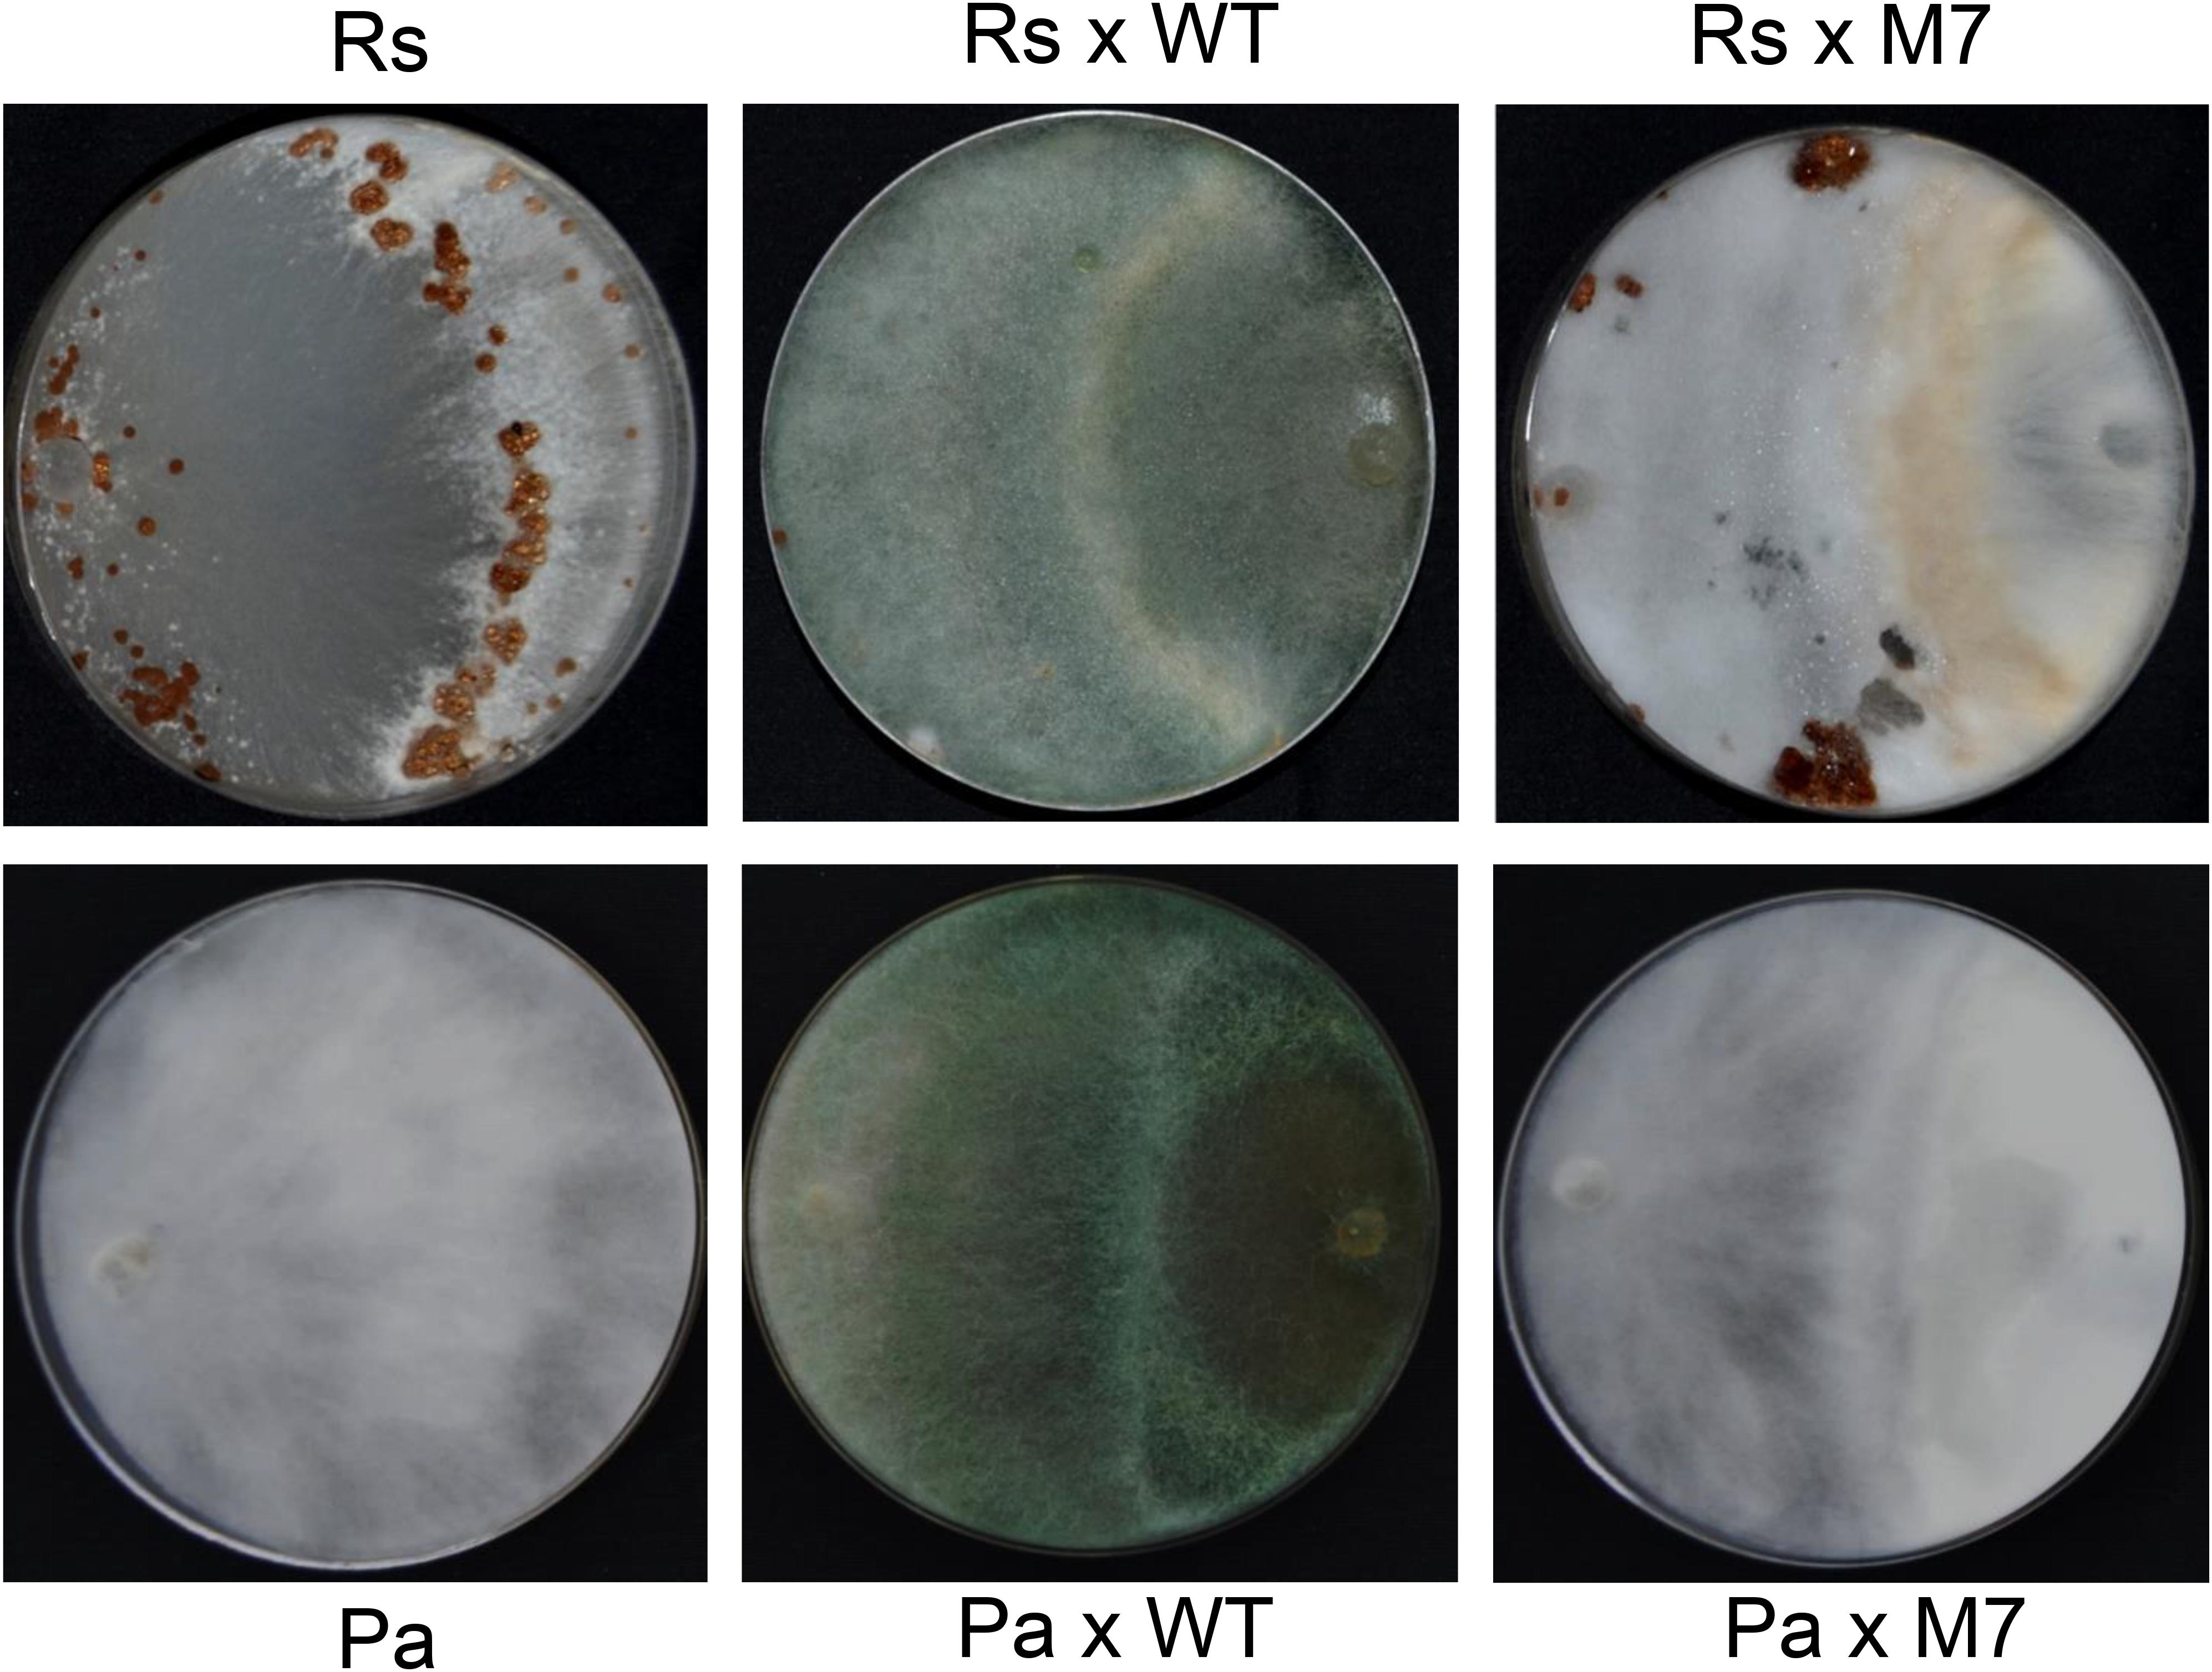 Frontiers Whole Genome Sequencing Reveals Major Deletions In The Genome Of M7 A Gamma Ray Induced Mutant Of Trichoderma Virens That Is Repressed In Conidiation Secondary Metabolism And Mycoparasitism Microbiology